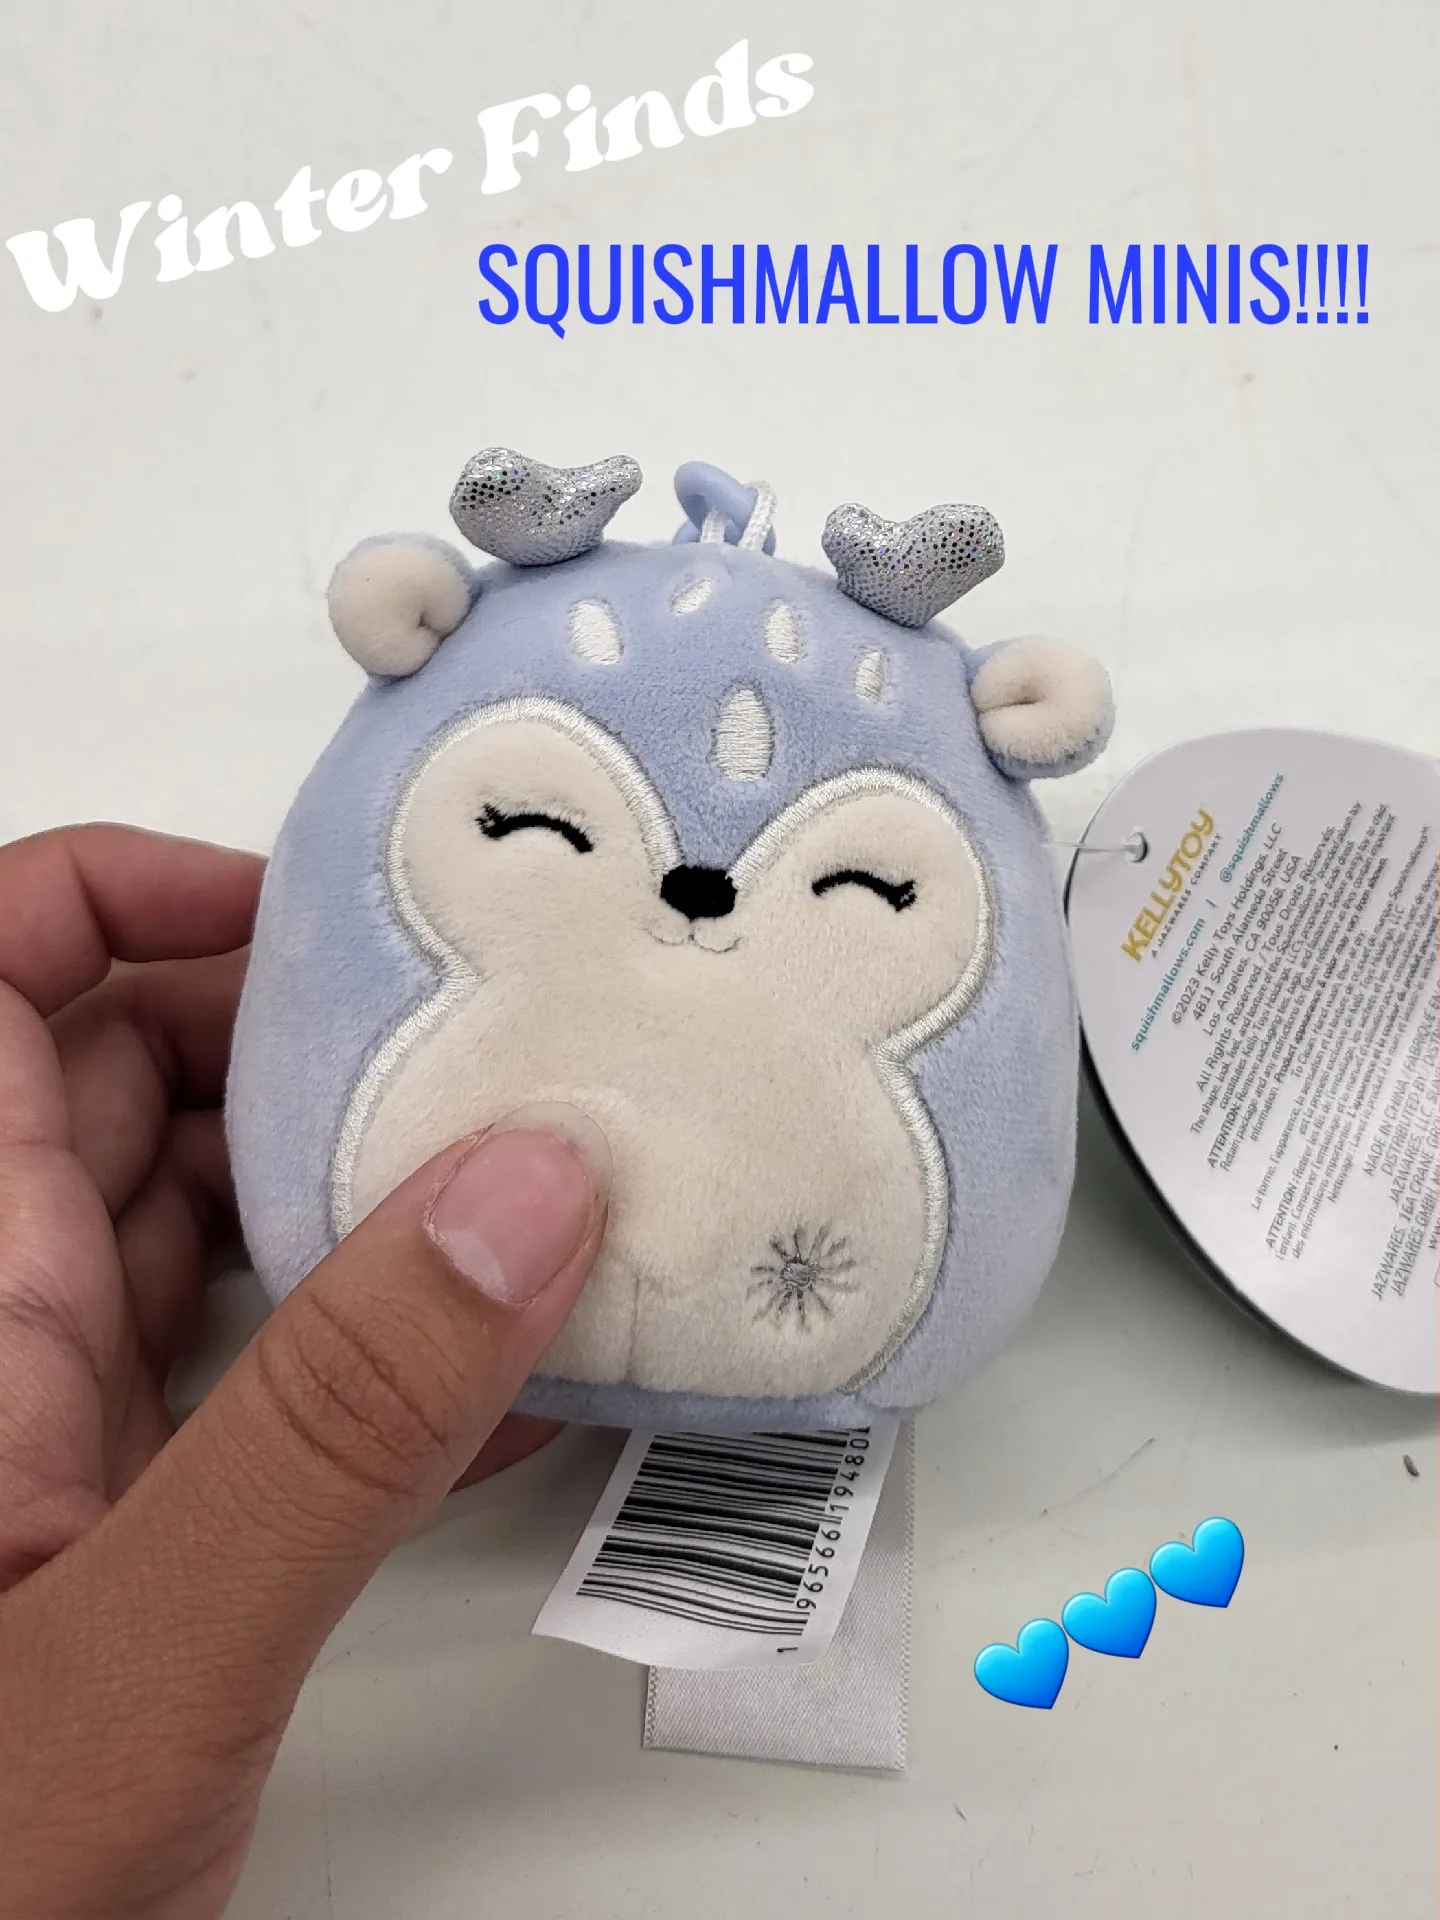 The voice 😂 who has seen the #harrypotter #squishmallows at #costco??, costco squishmallows